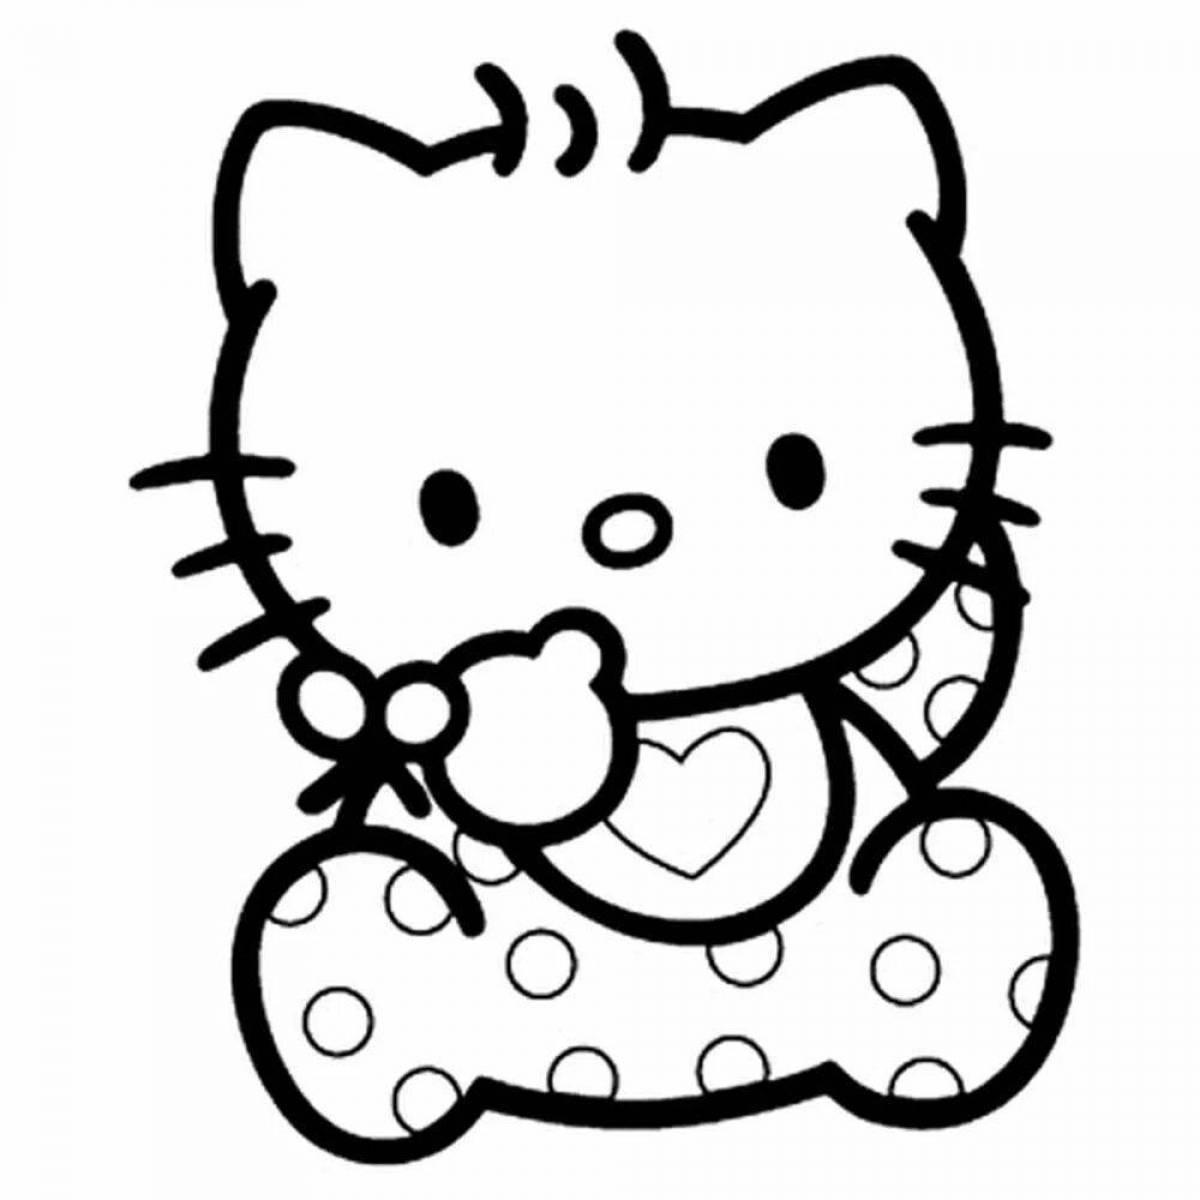 Fabulous hello kitty sticker coloring page